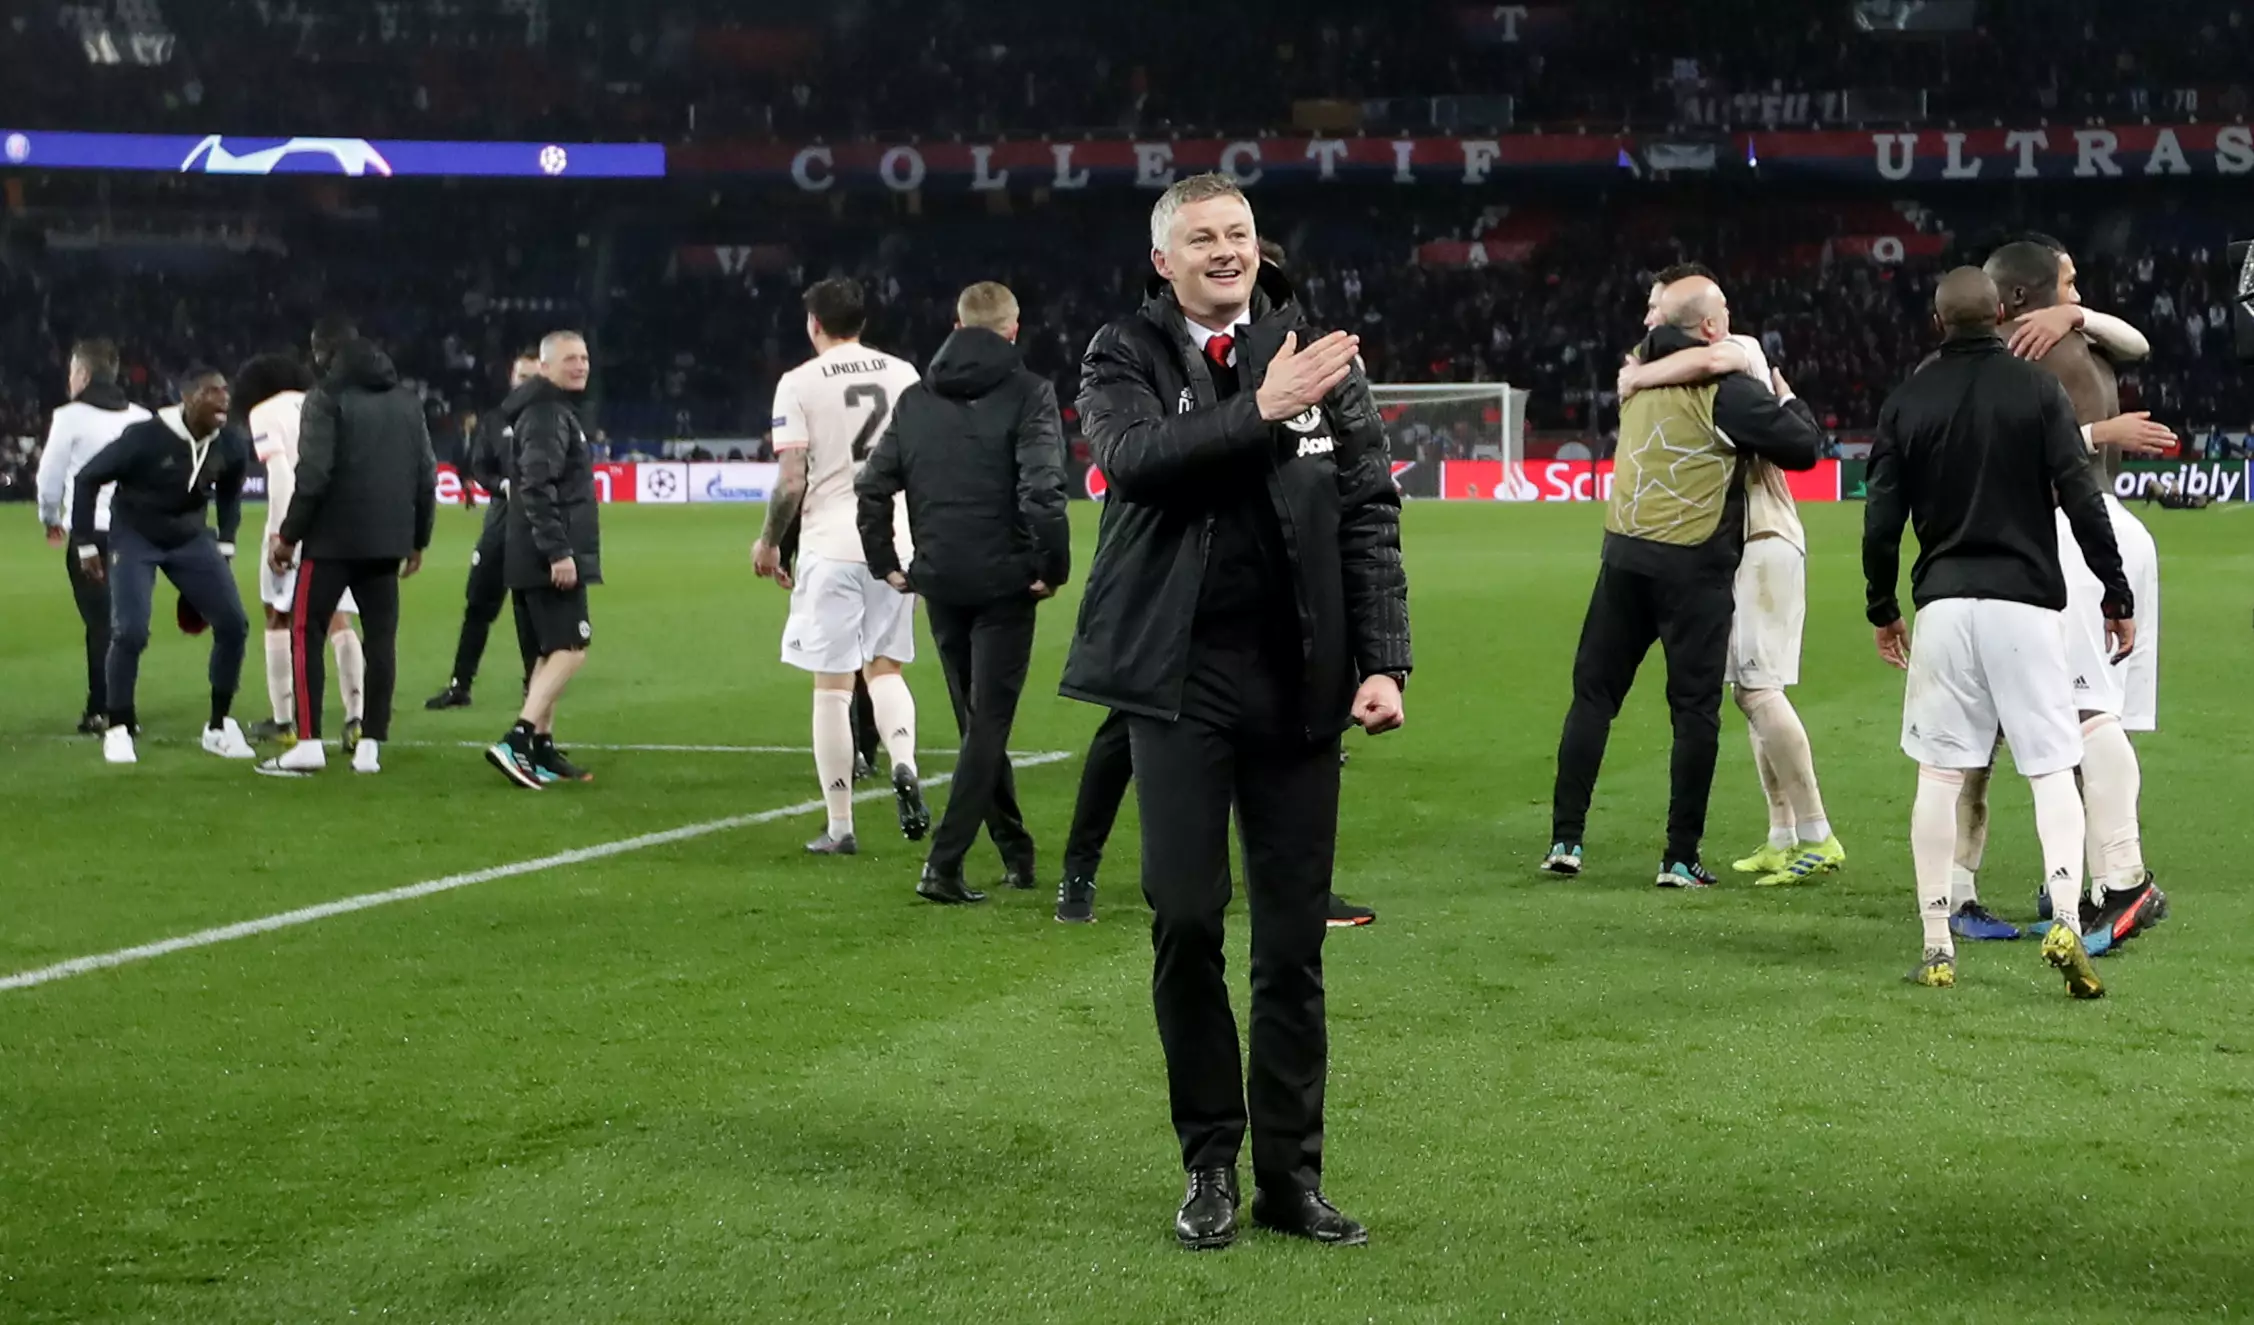 Will the club remain patient with Solskjaer? Image: PA Images